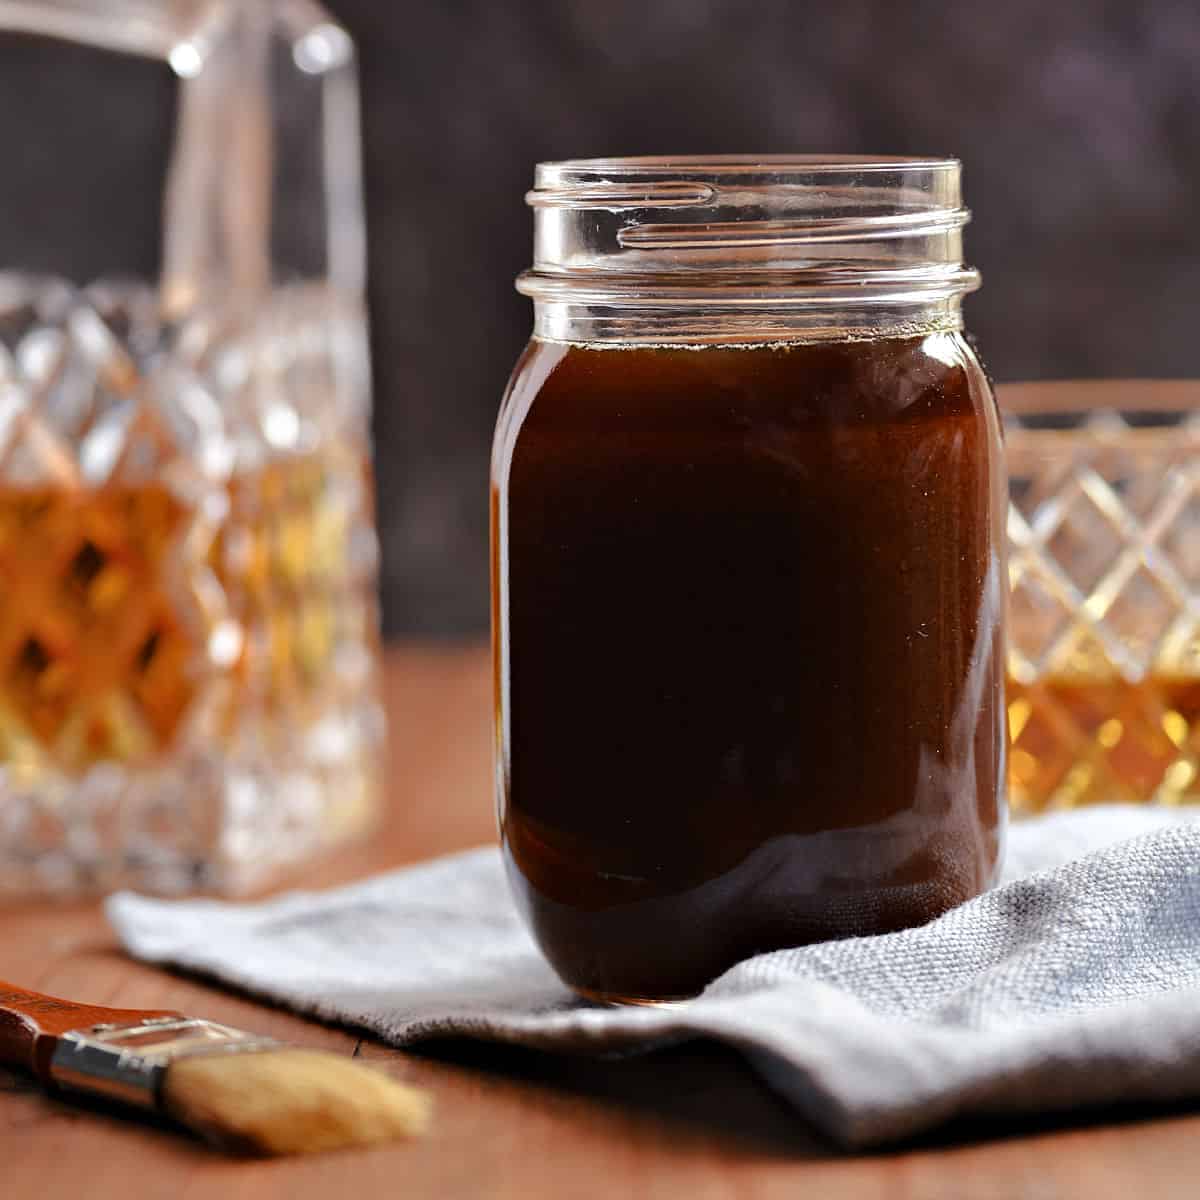 Whiskey glaze in a glass jar with a bottle and glass of whiskey in the background.